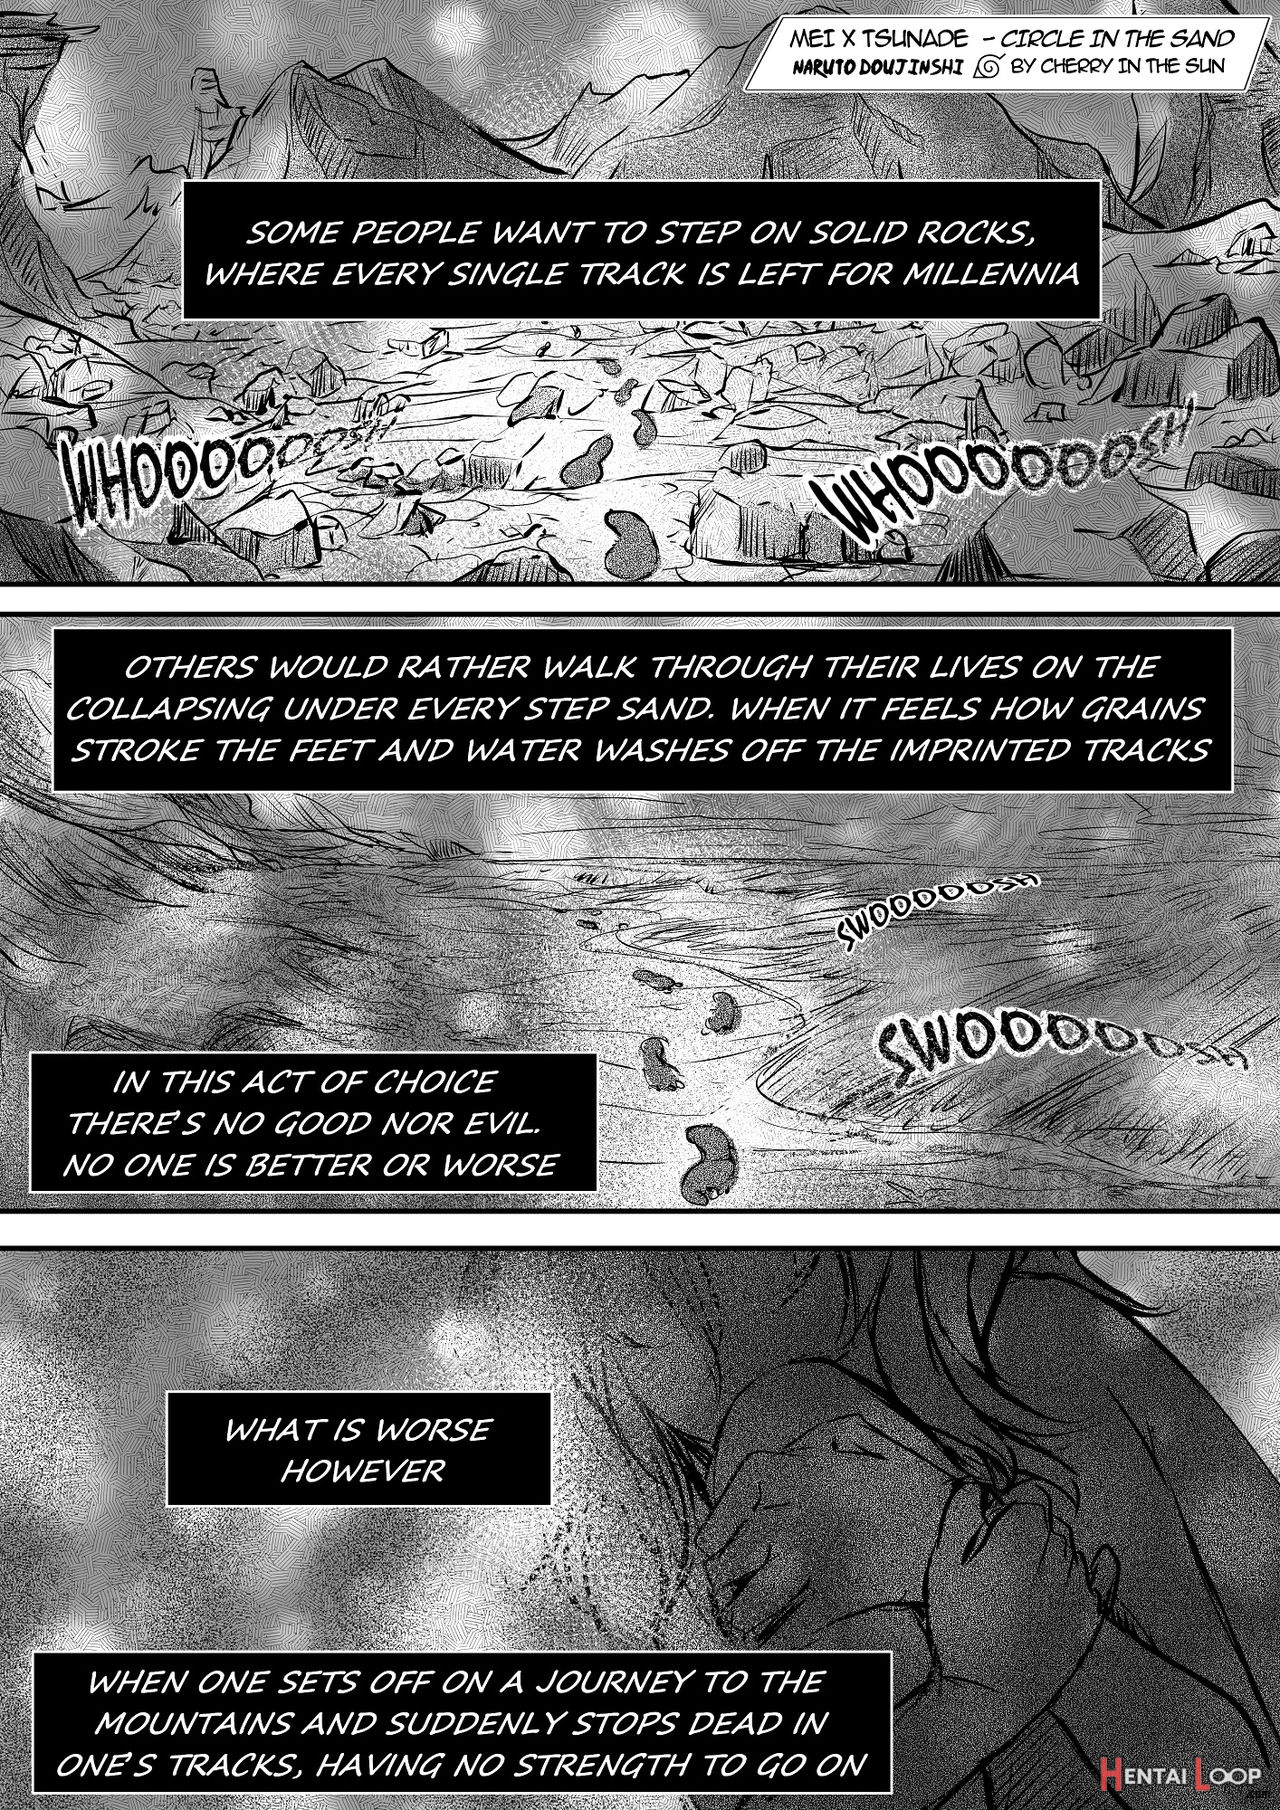 Circle In The Sand page 2